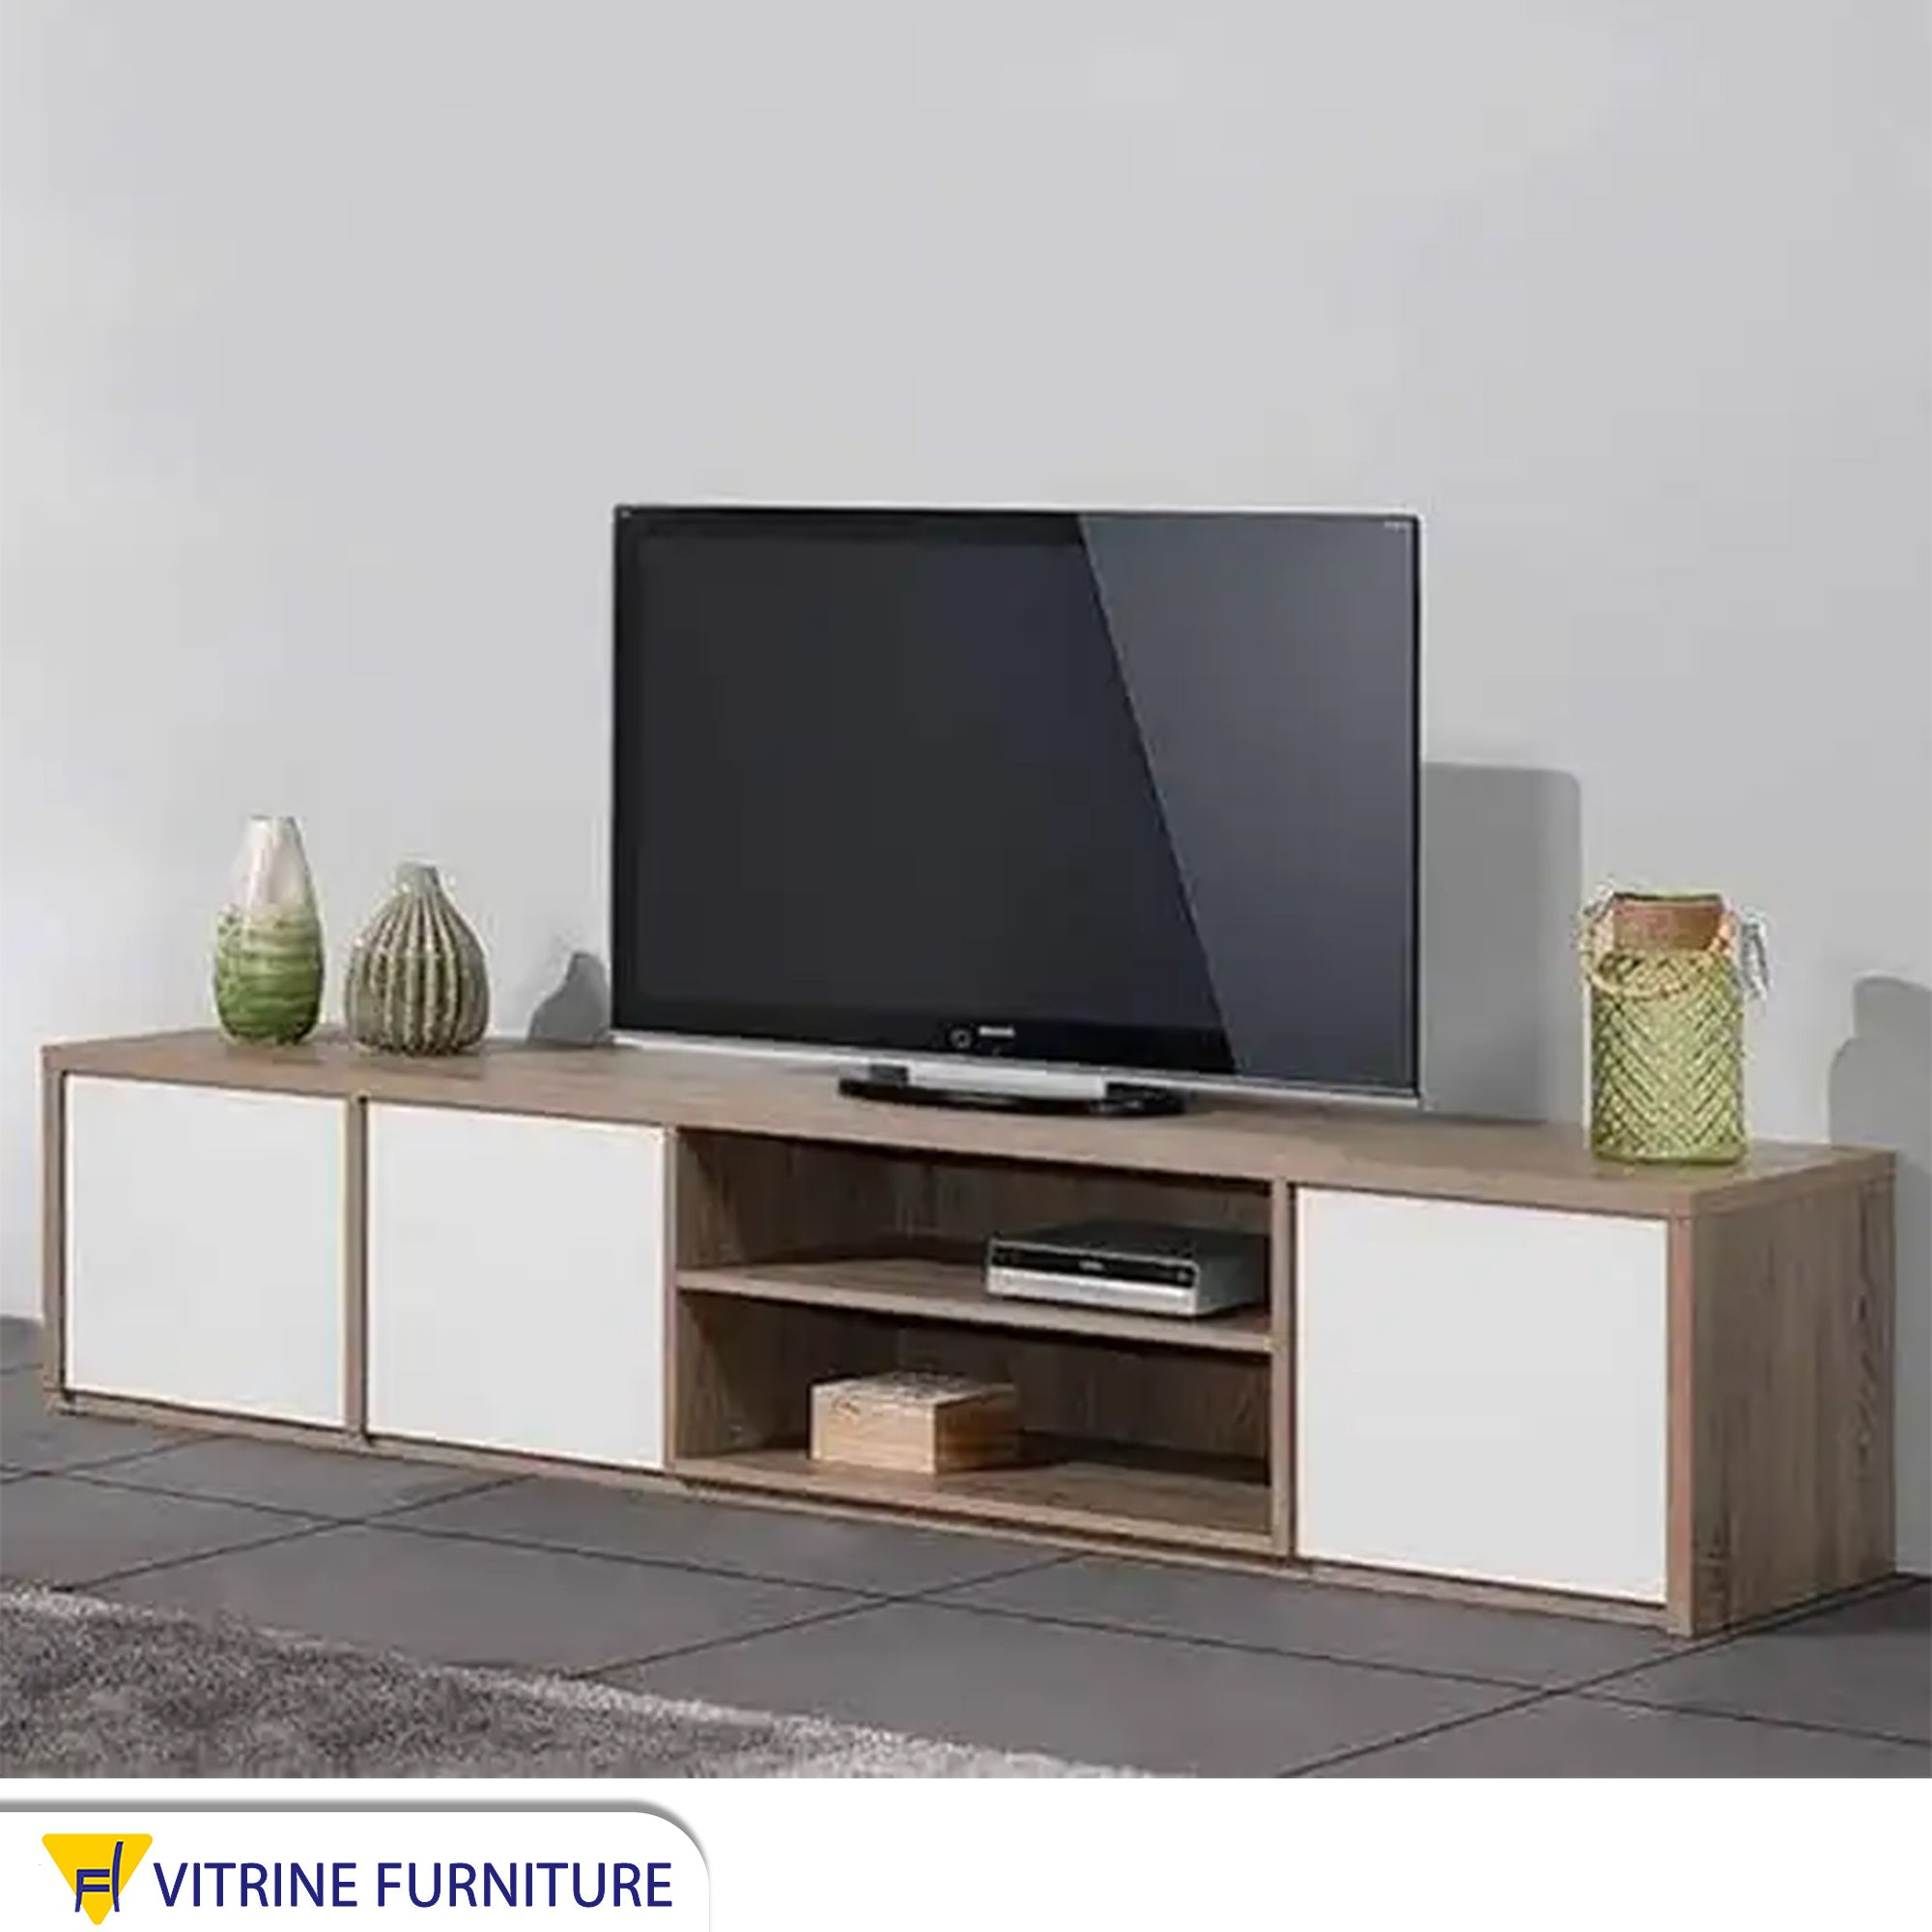 A TV table with two shelves and three doors